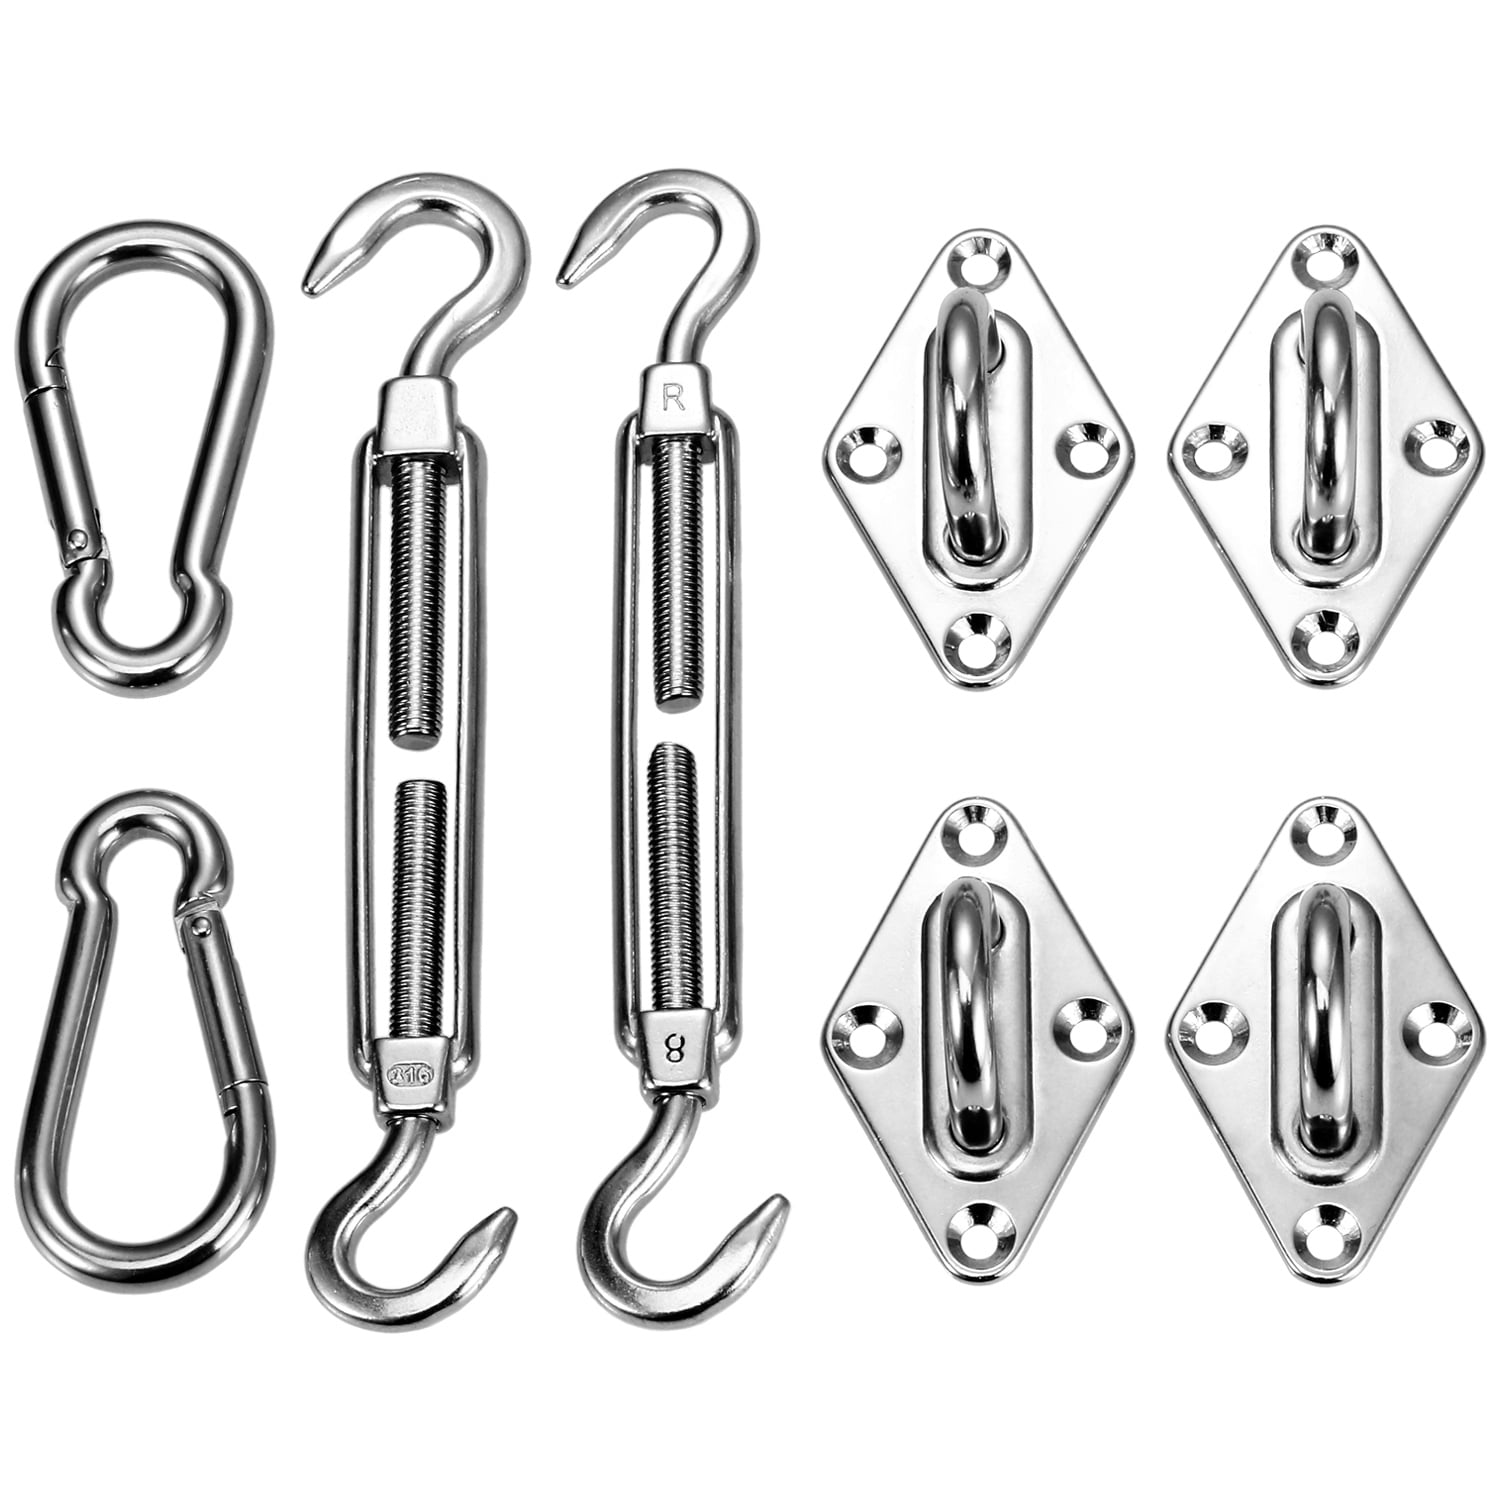 8X Stainless Steel Sun Fixing Fittings Sail Shade Kit Garden Awning Canopy Tools 